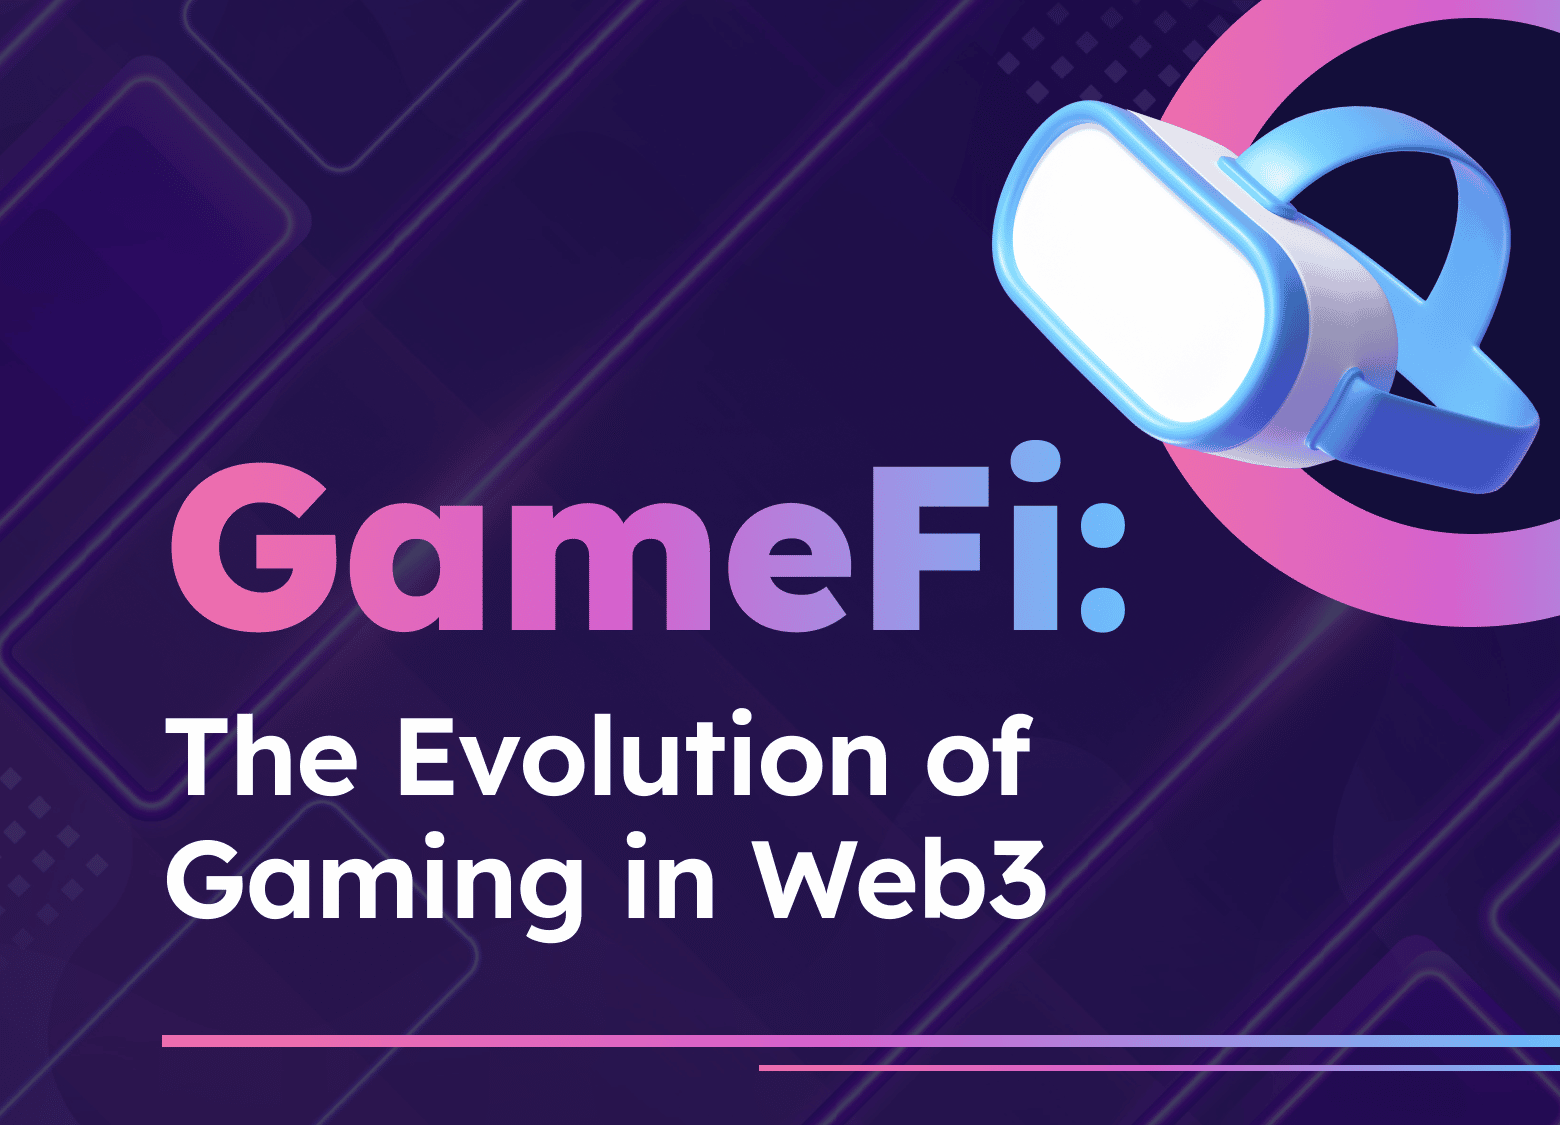 GameFi: The Evolution of Gaming in Web3 